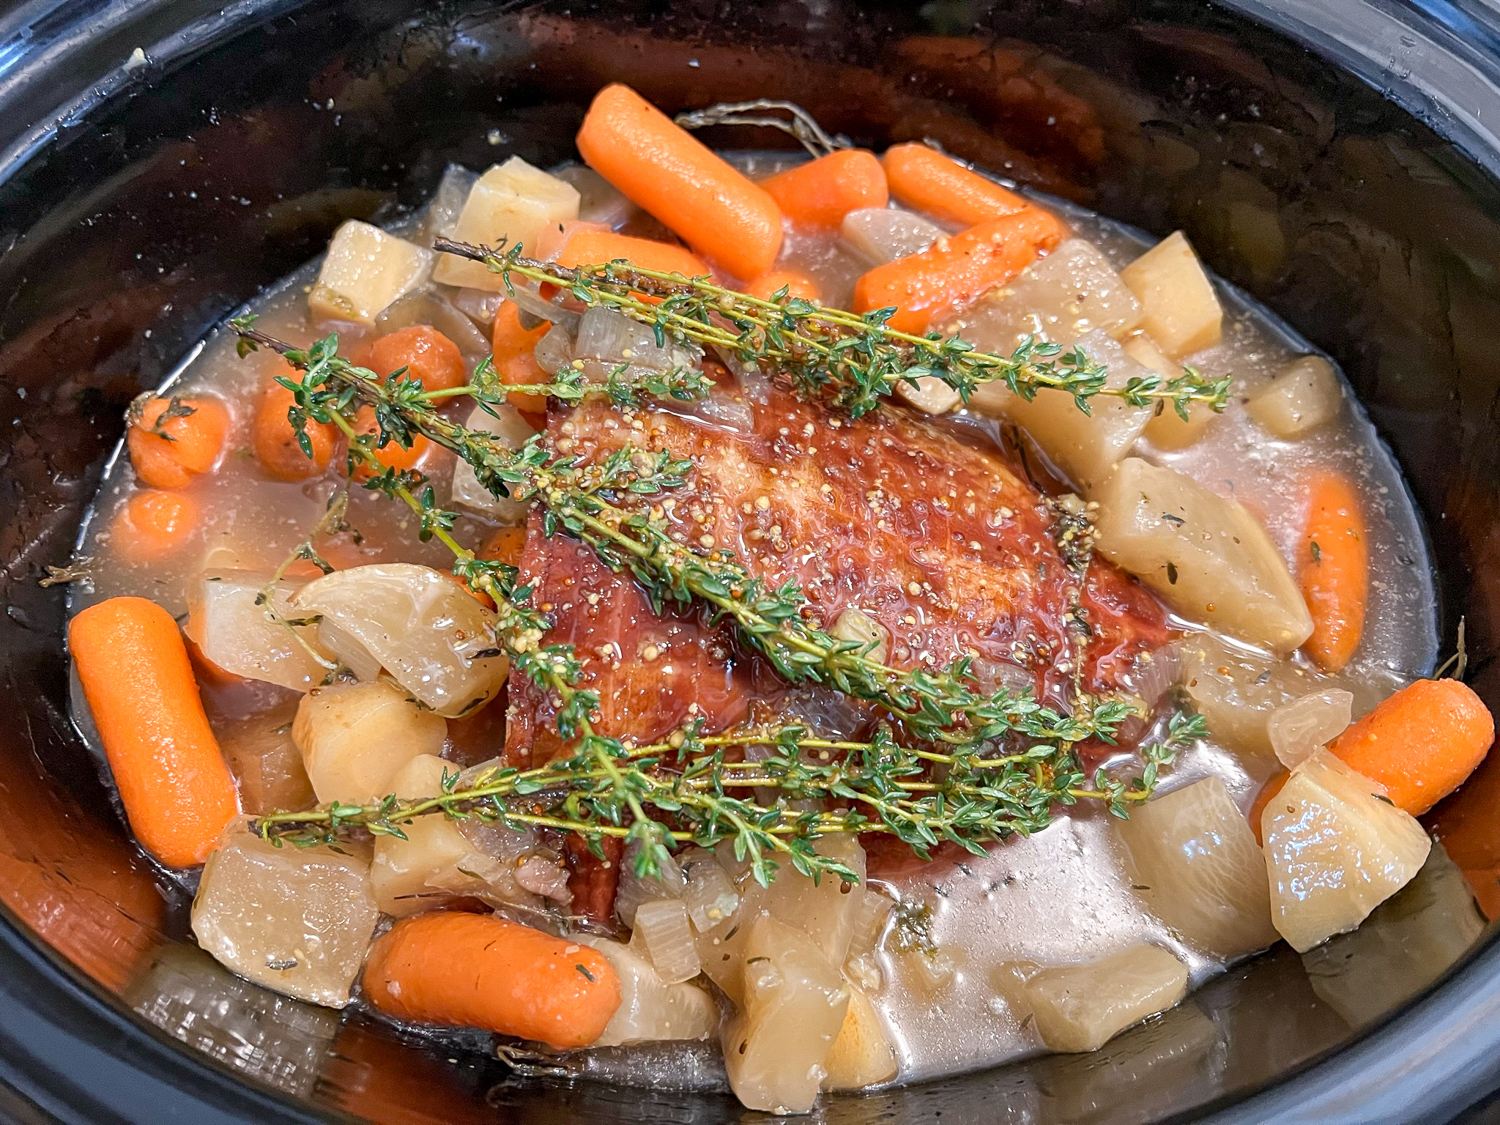 Ham, broth, vegetables, and glaze added to the slow cooker.